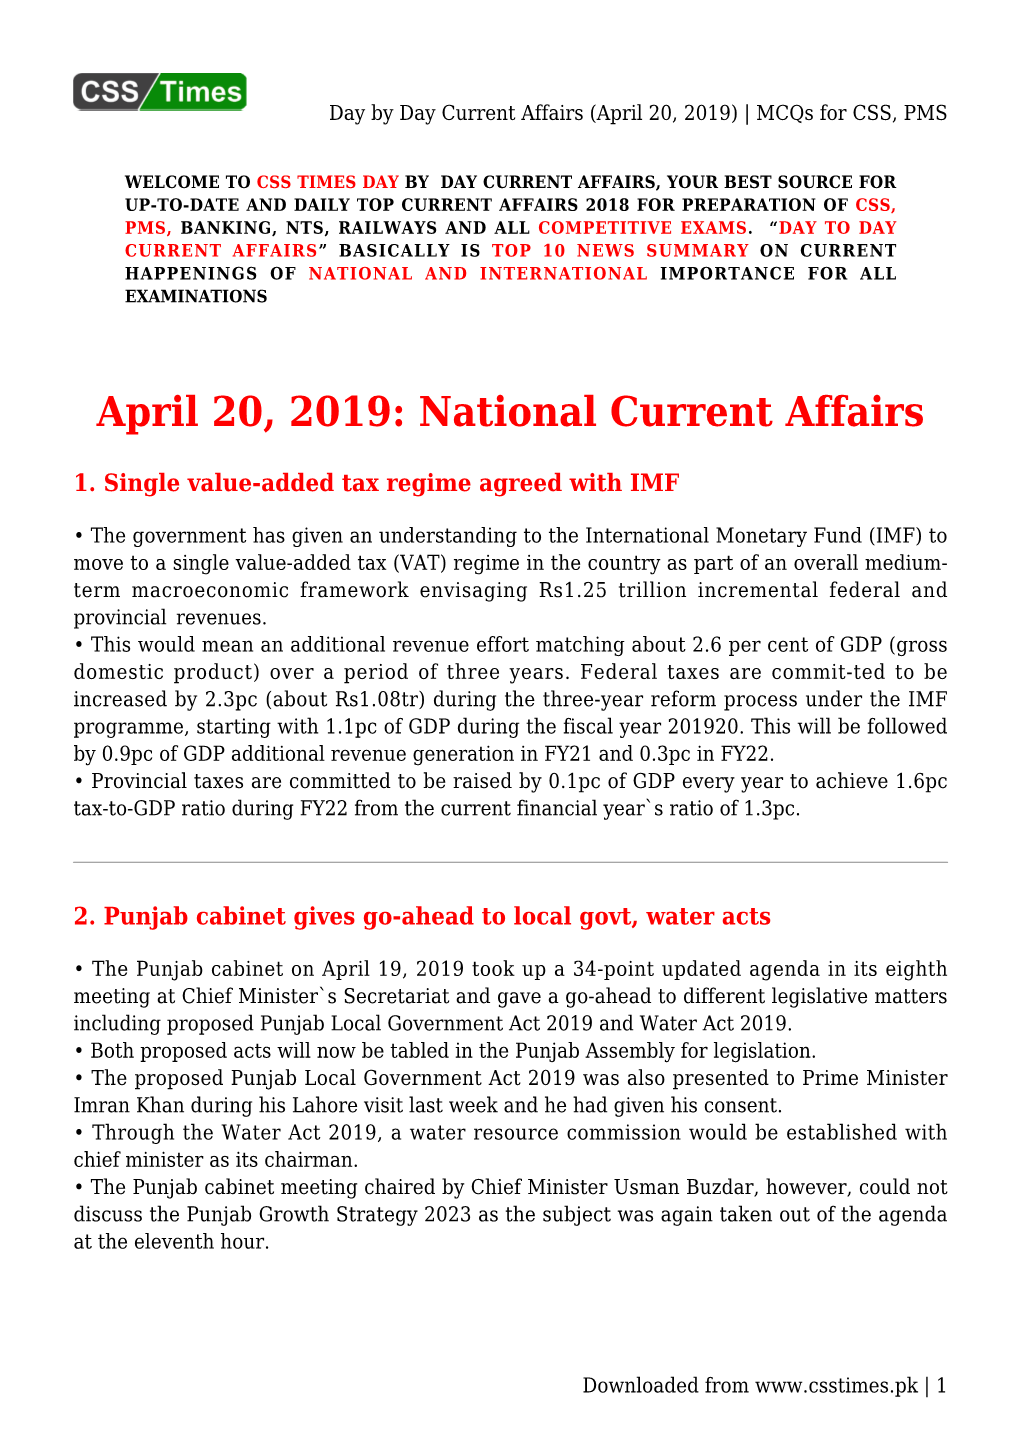 Day by Day Current Affairs (April 20, 2019) | Mcqs for CSS, PMS